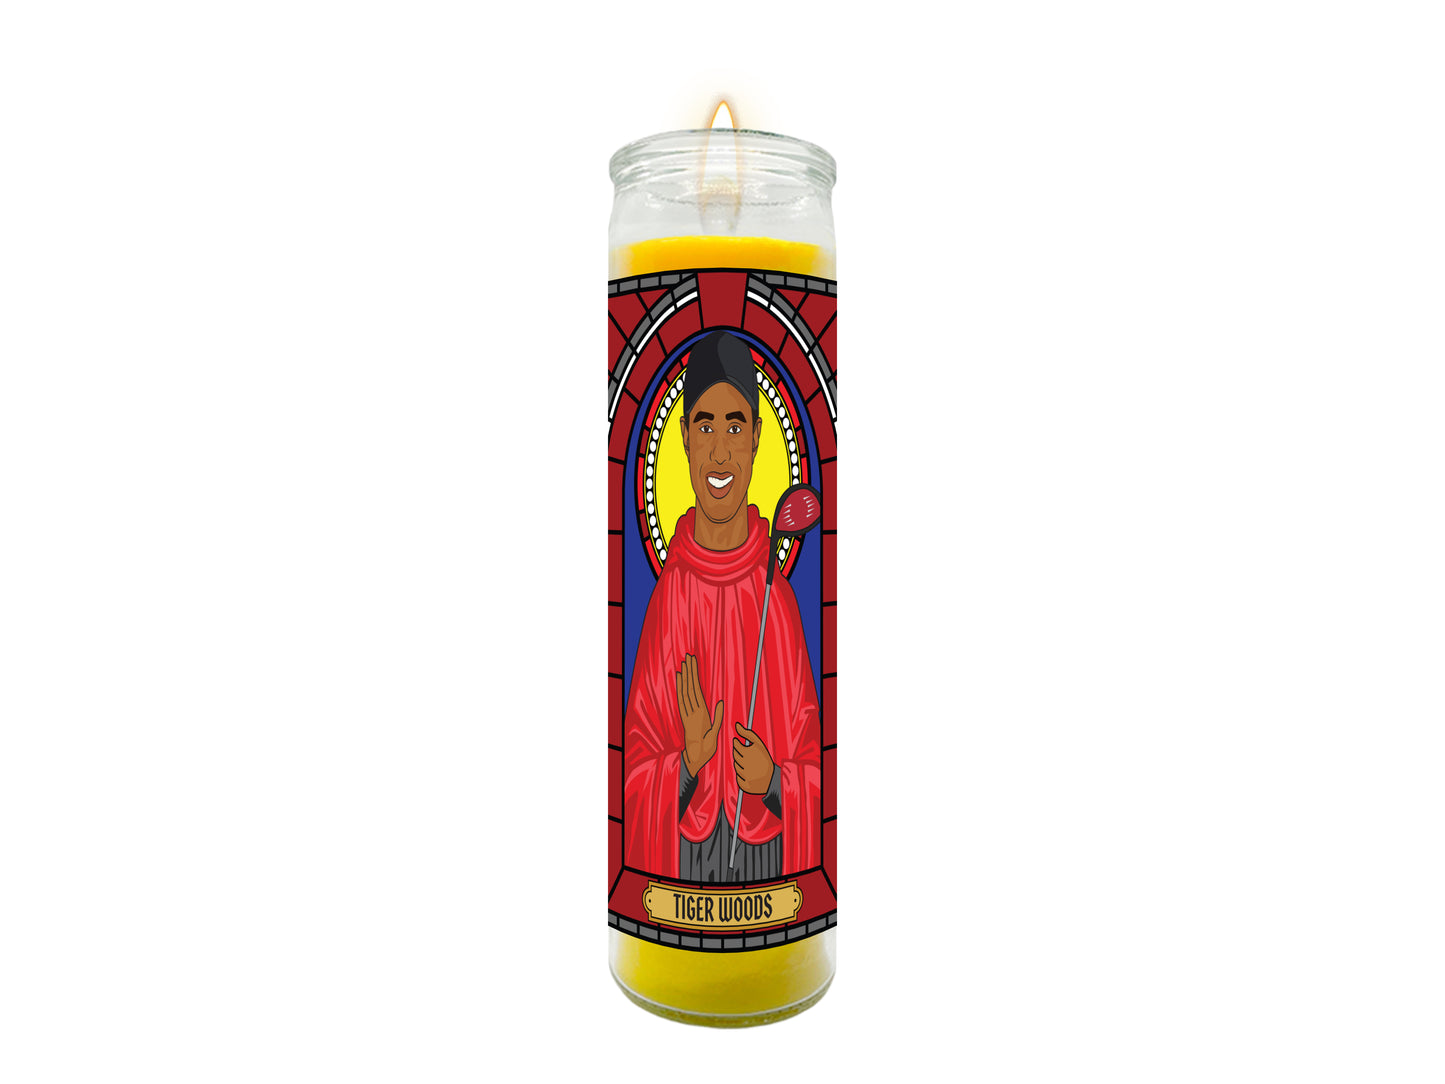 Tiger Woods Illustrated Prayer Candle